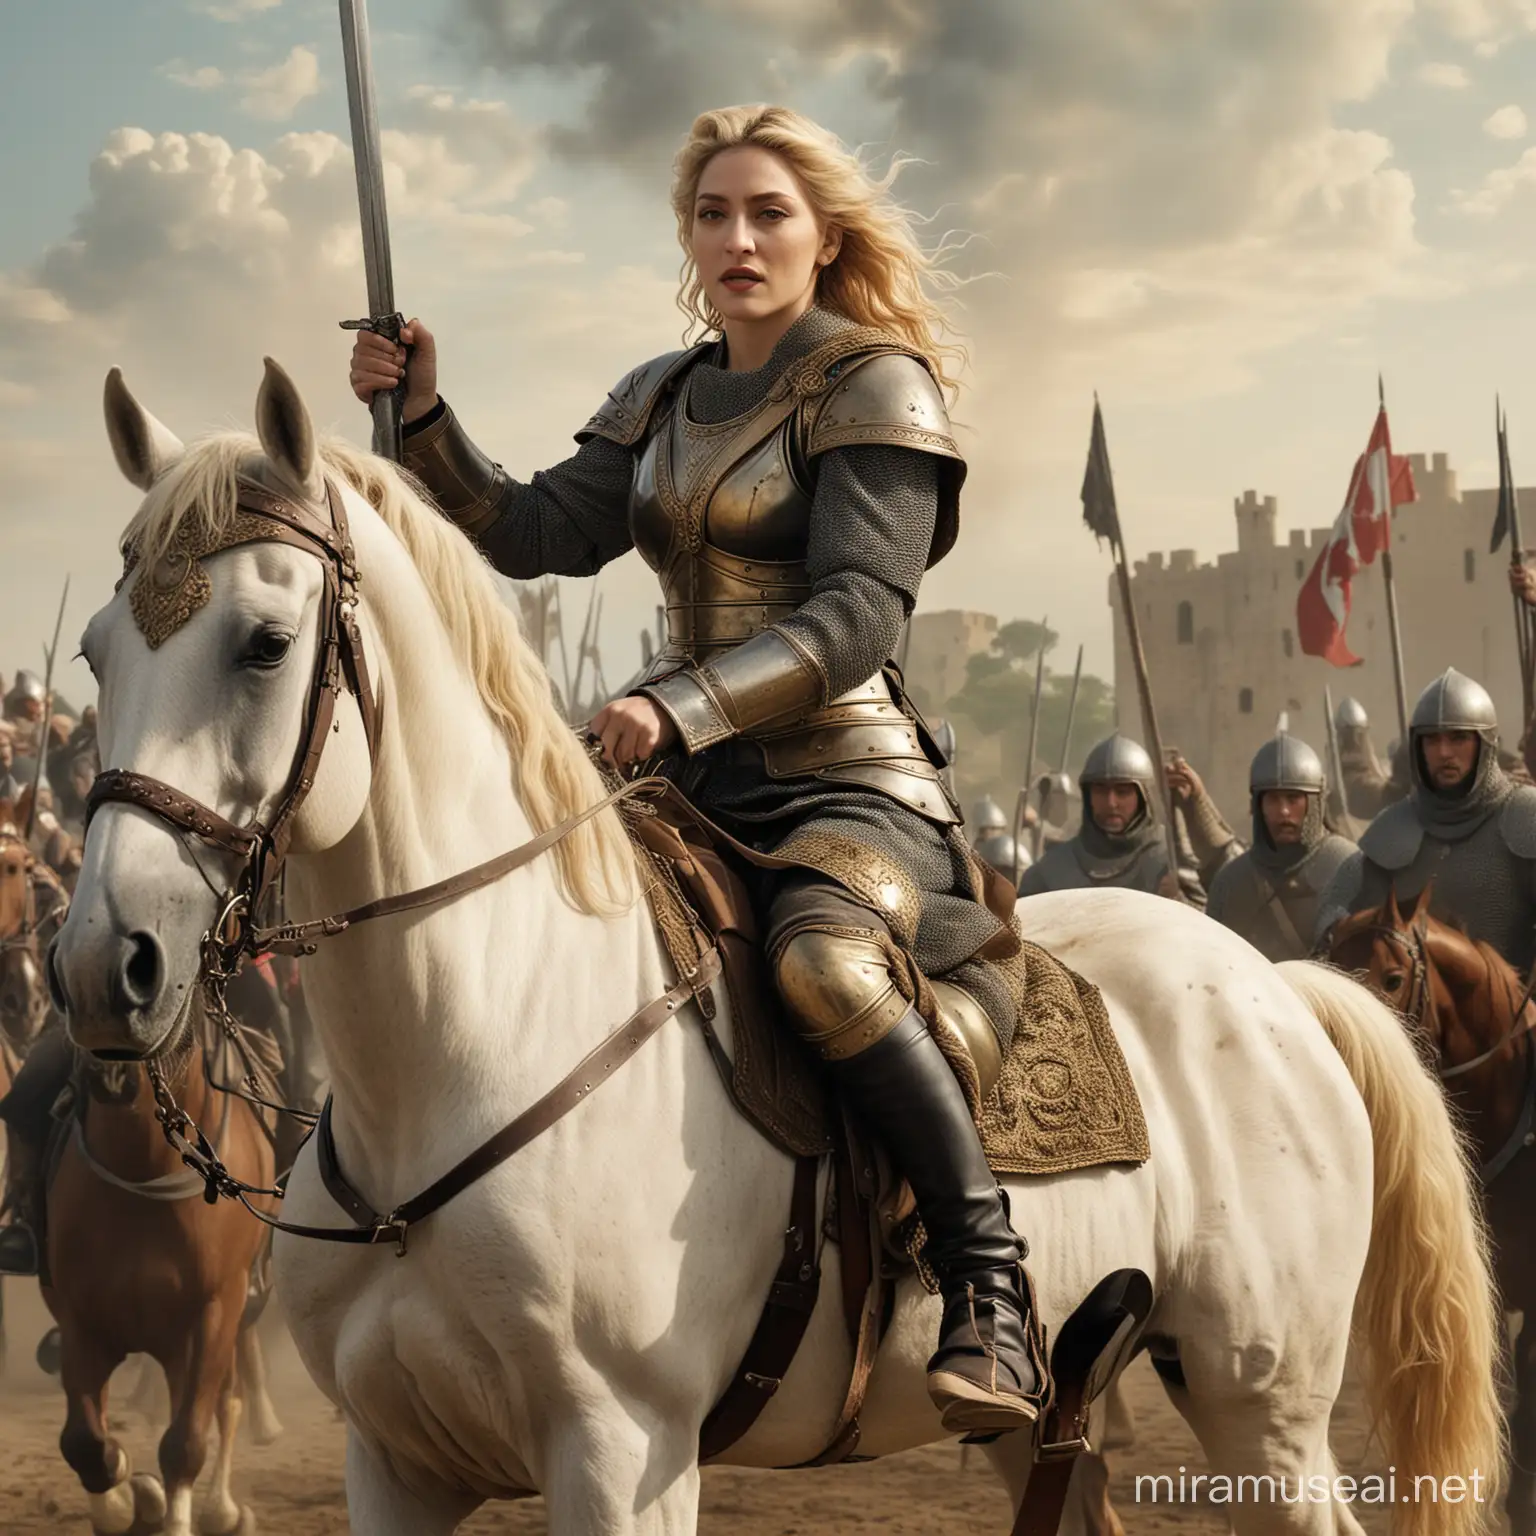 Make a picture of Madonna riding on a horse into battle during a medieval war